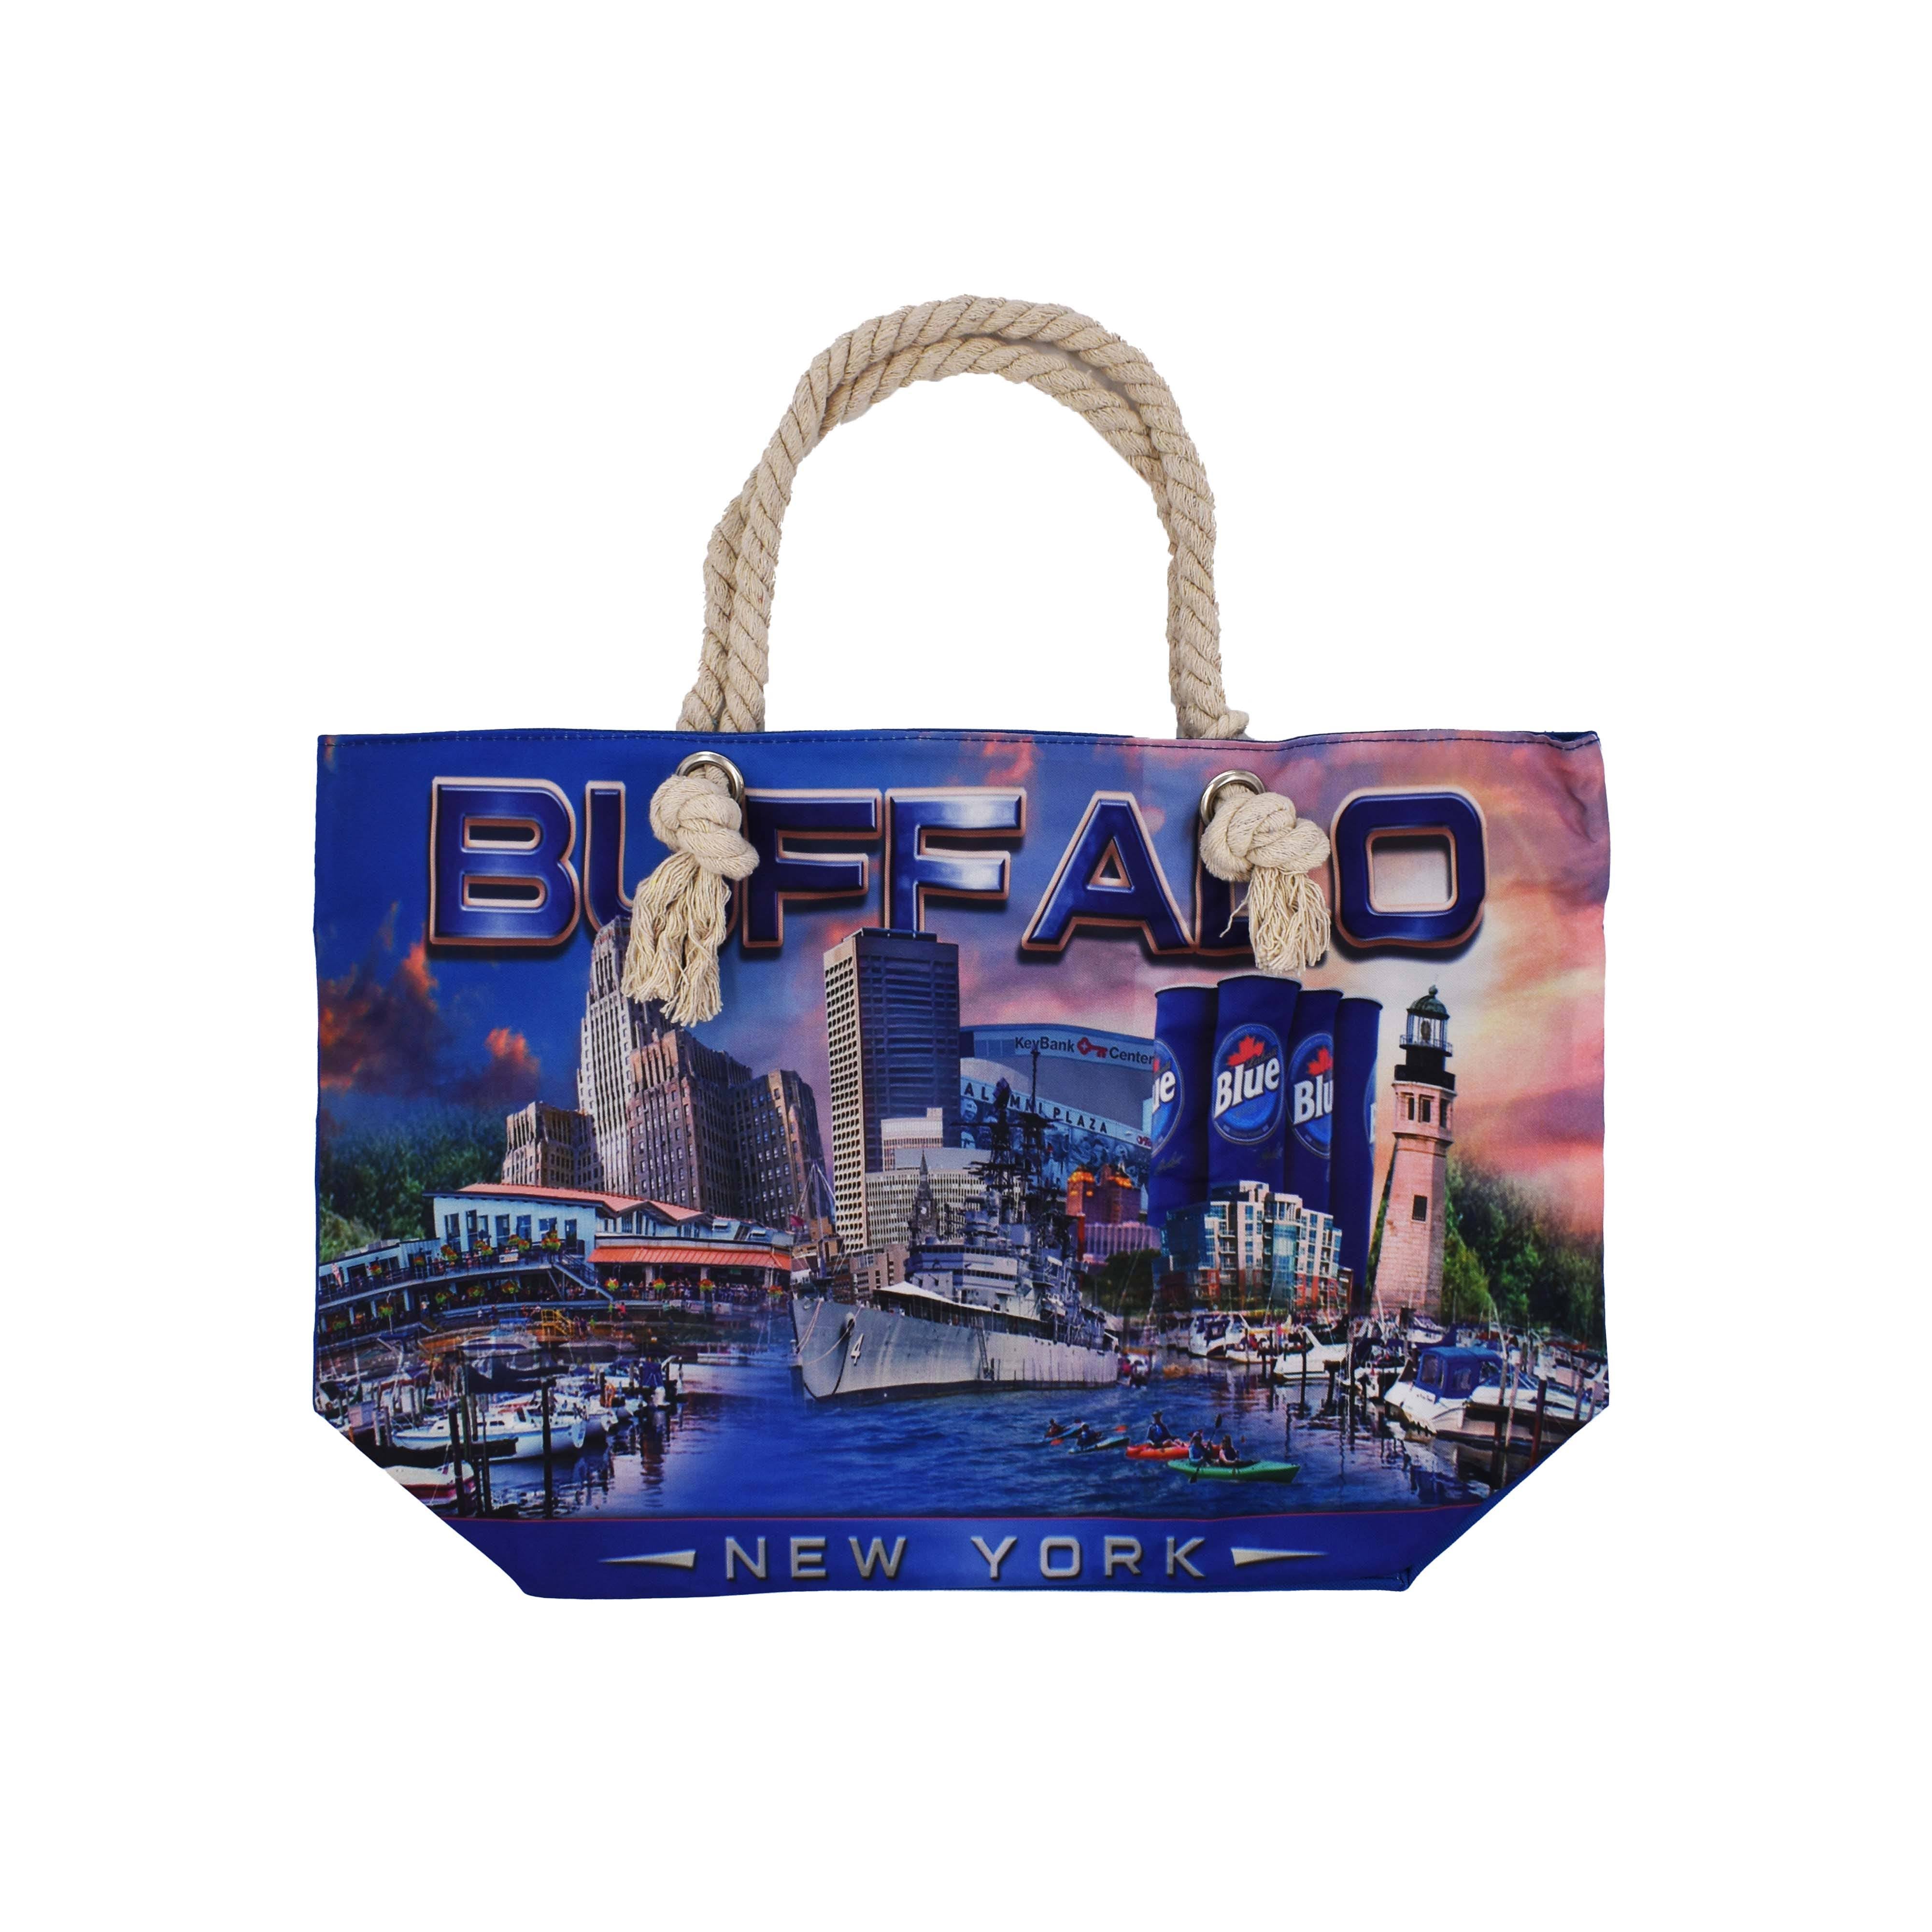 All Over New York Tote Bag